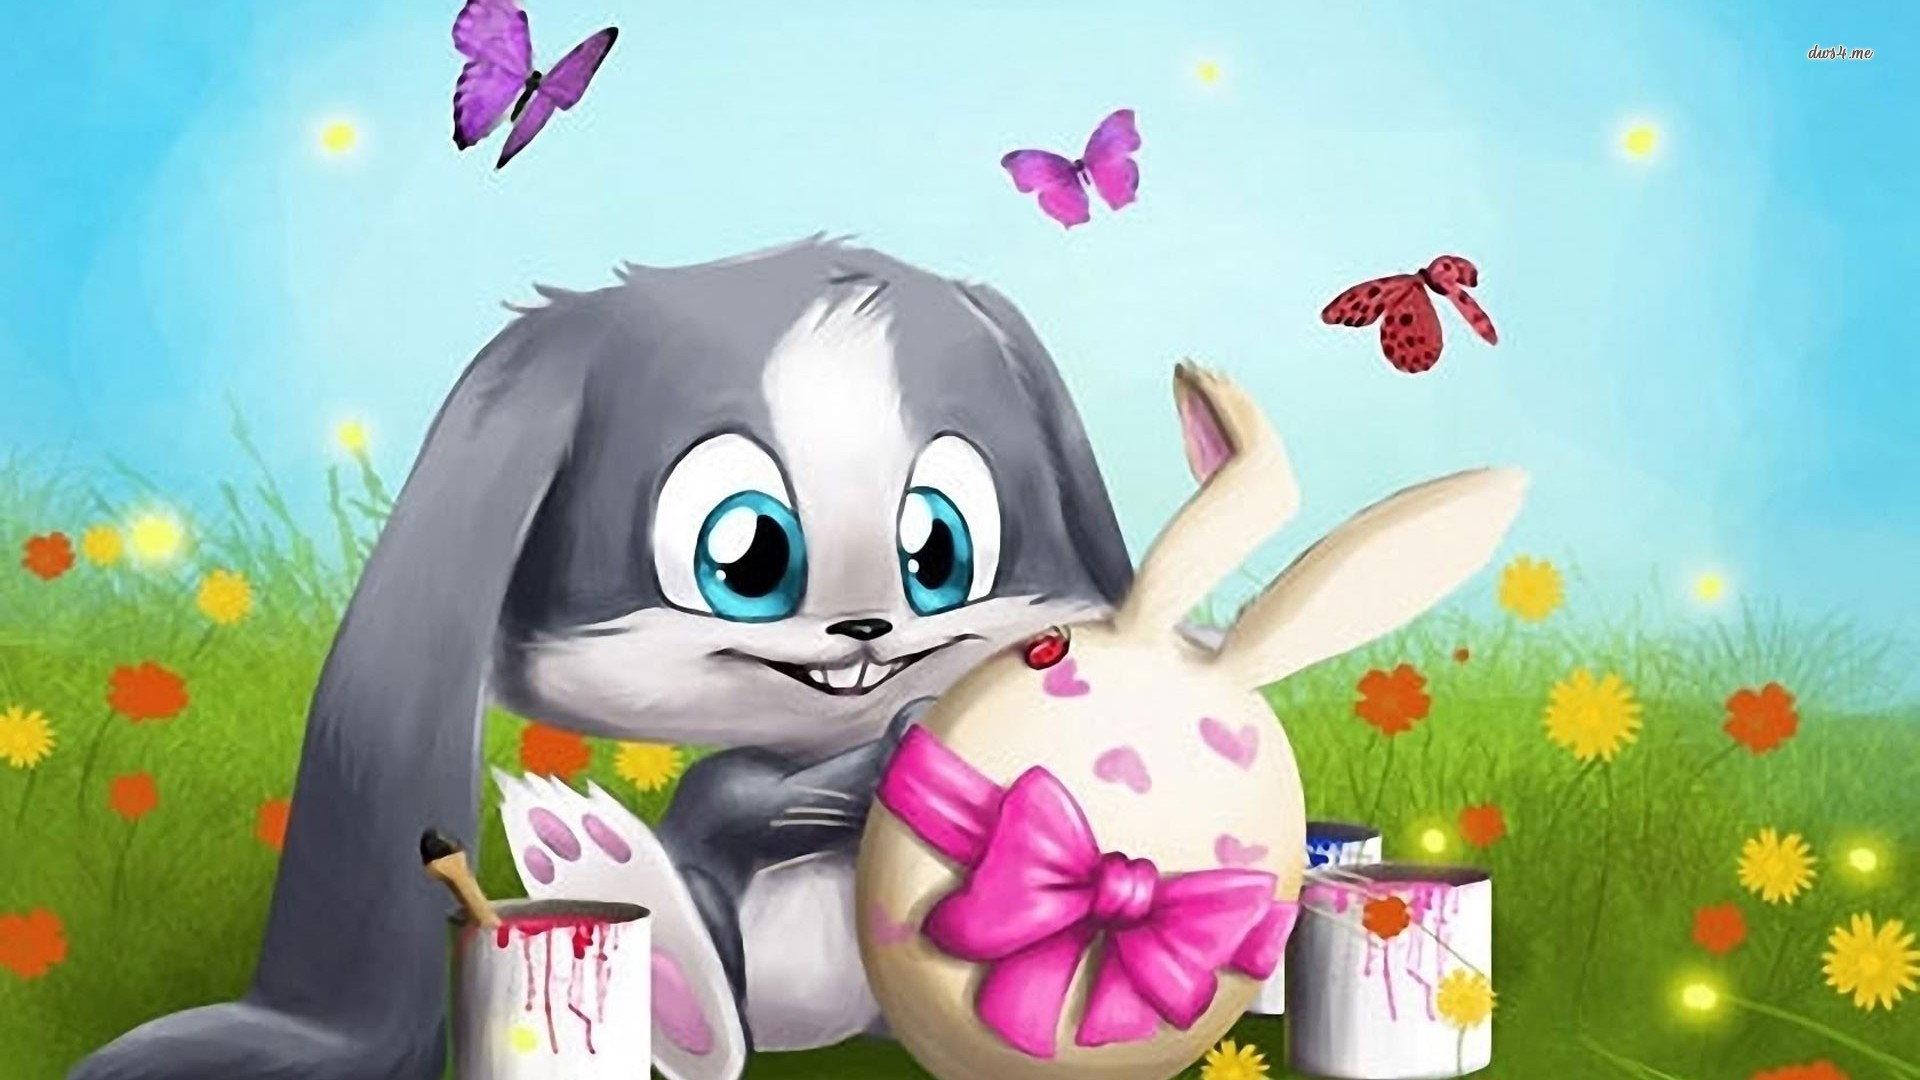 Cute Animated Wallpaper For Mobile Phone - Animated Cute Happy Easter - HD Wallpaper 